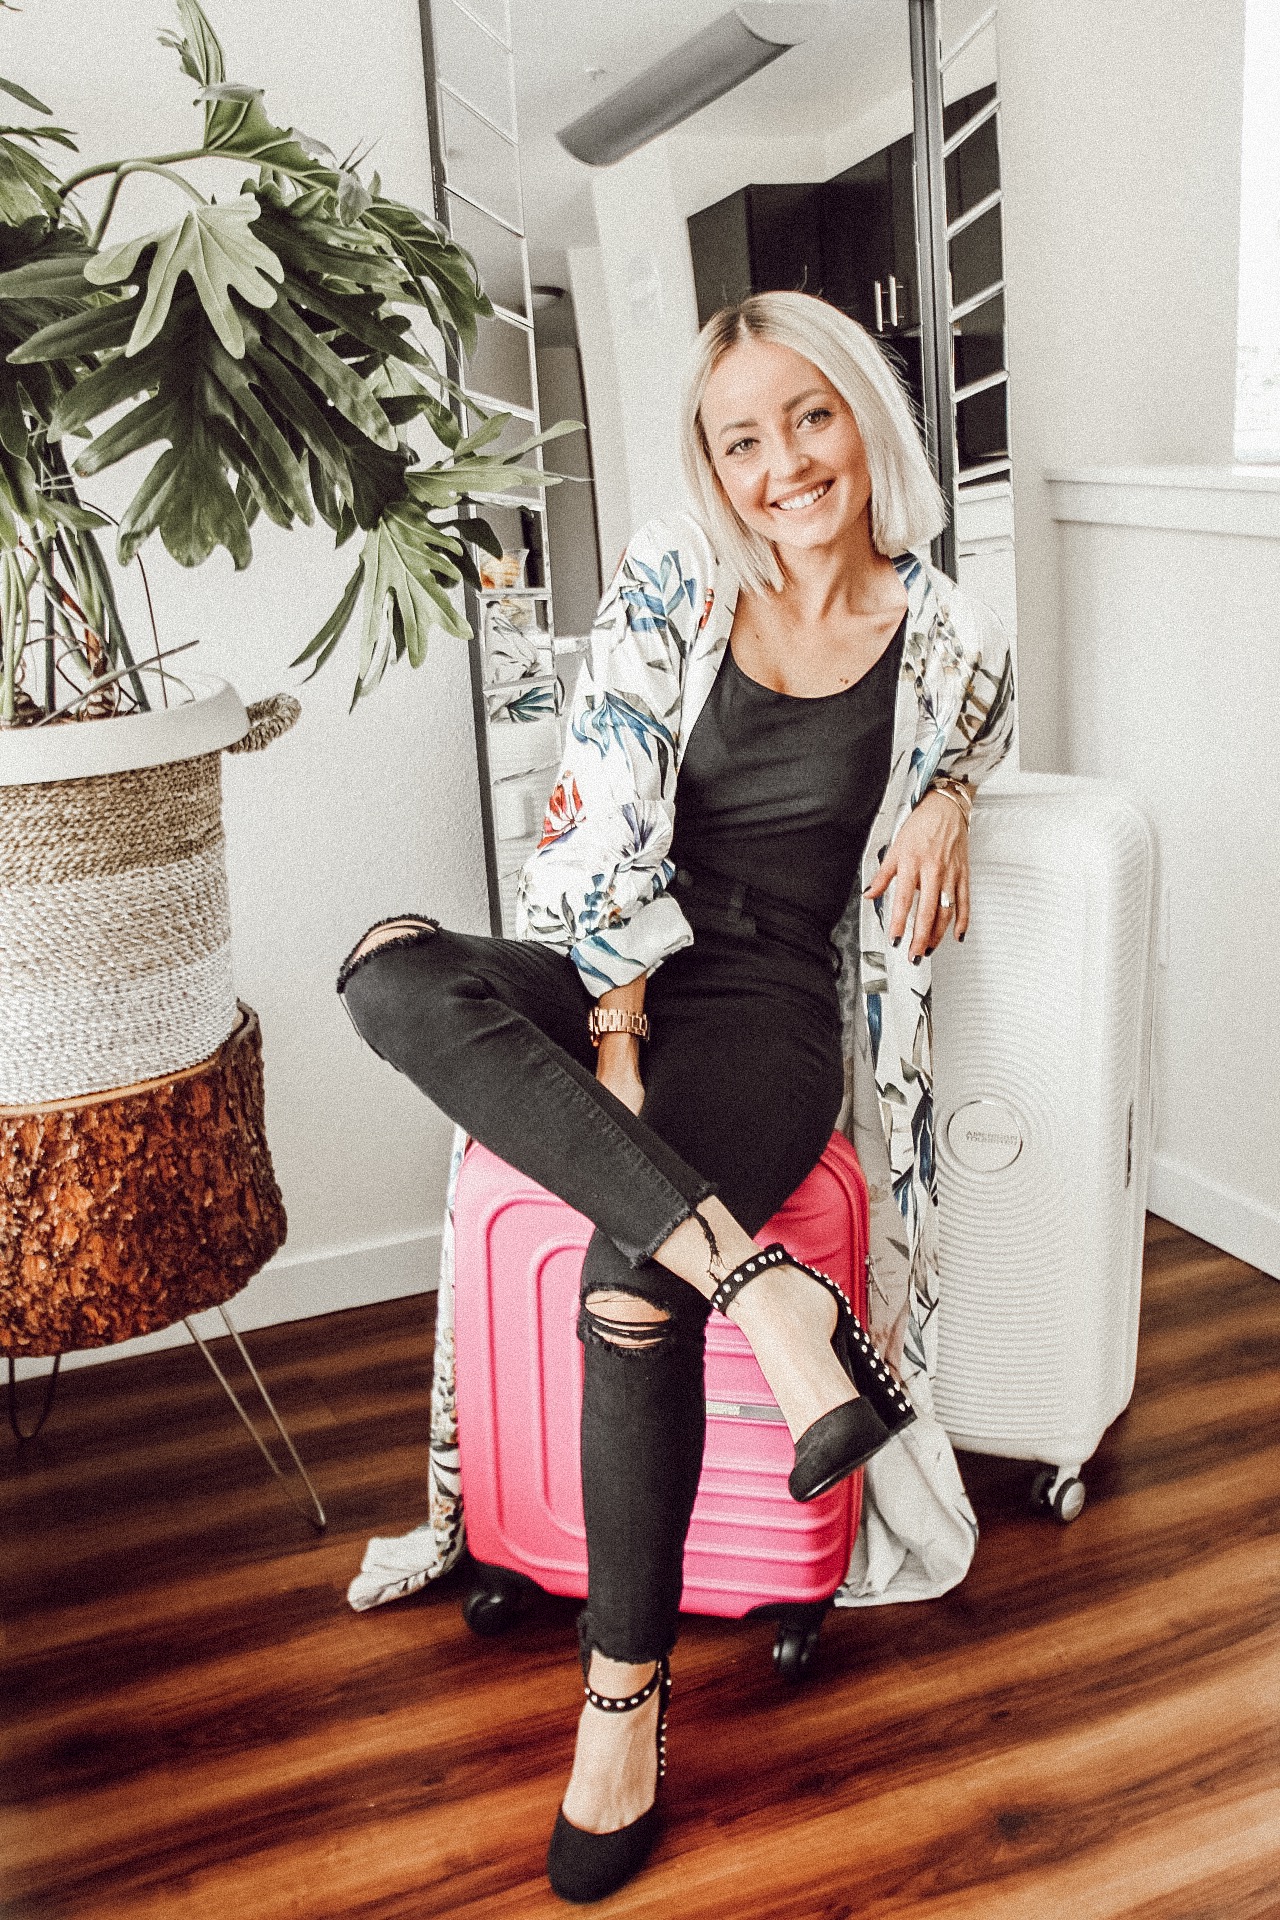 Alena Gidenko of modaprints.com shares tips on how to stay organized and pack for a trip with American Tourist suitcase